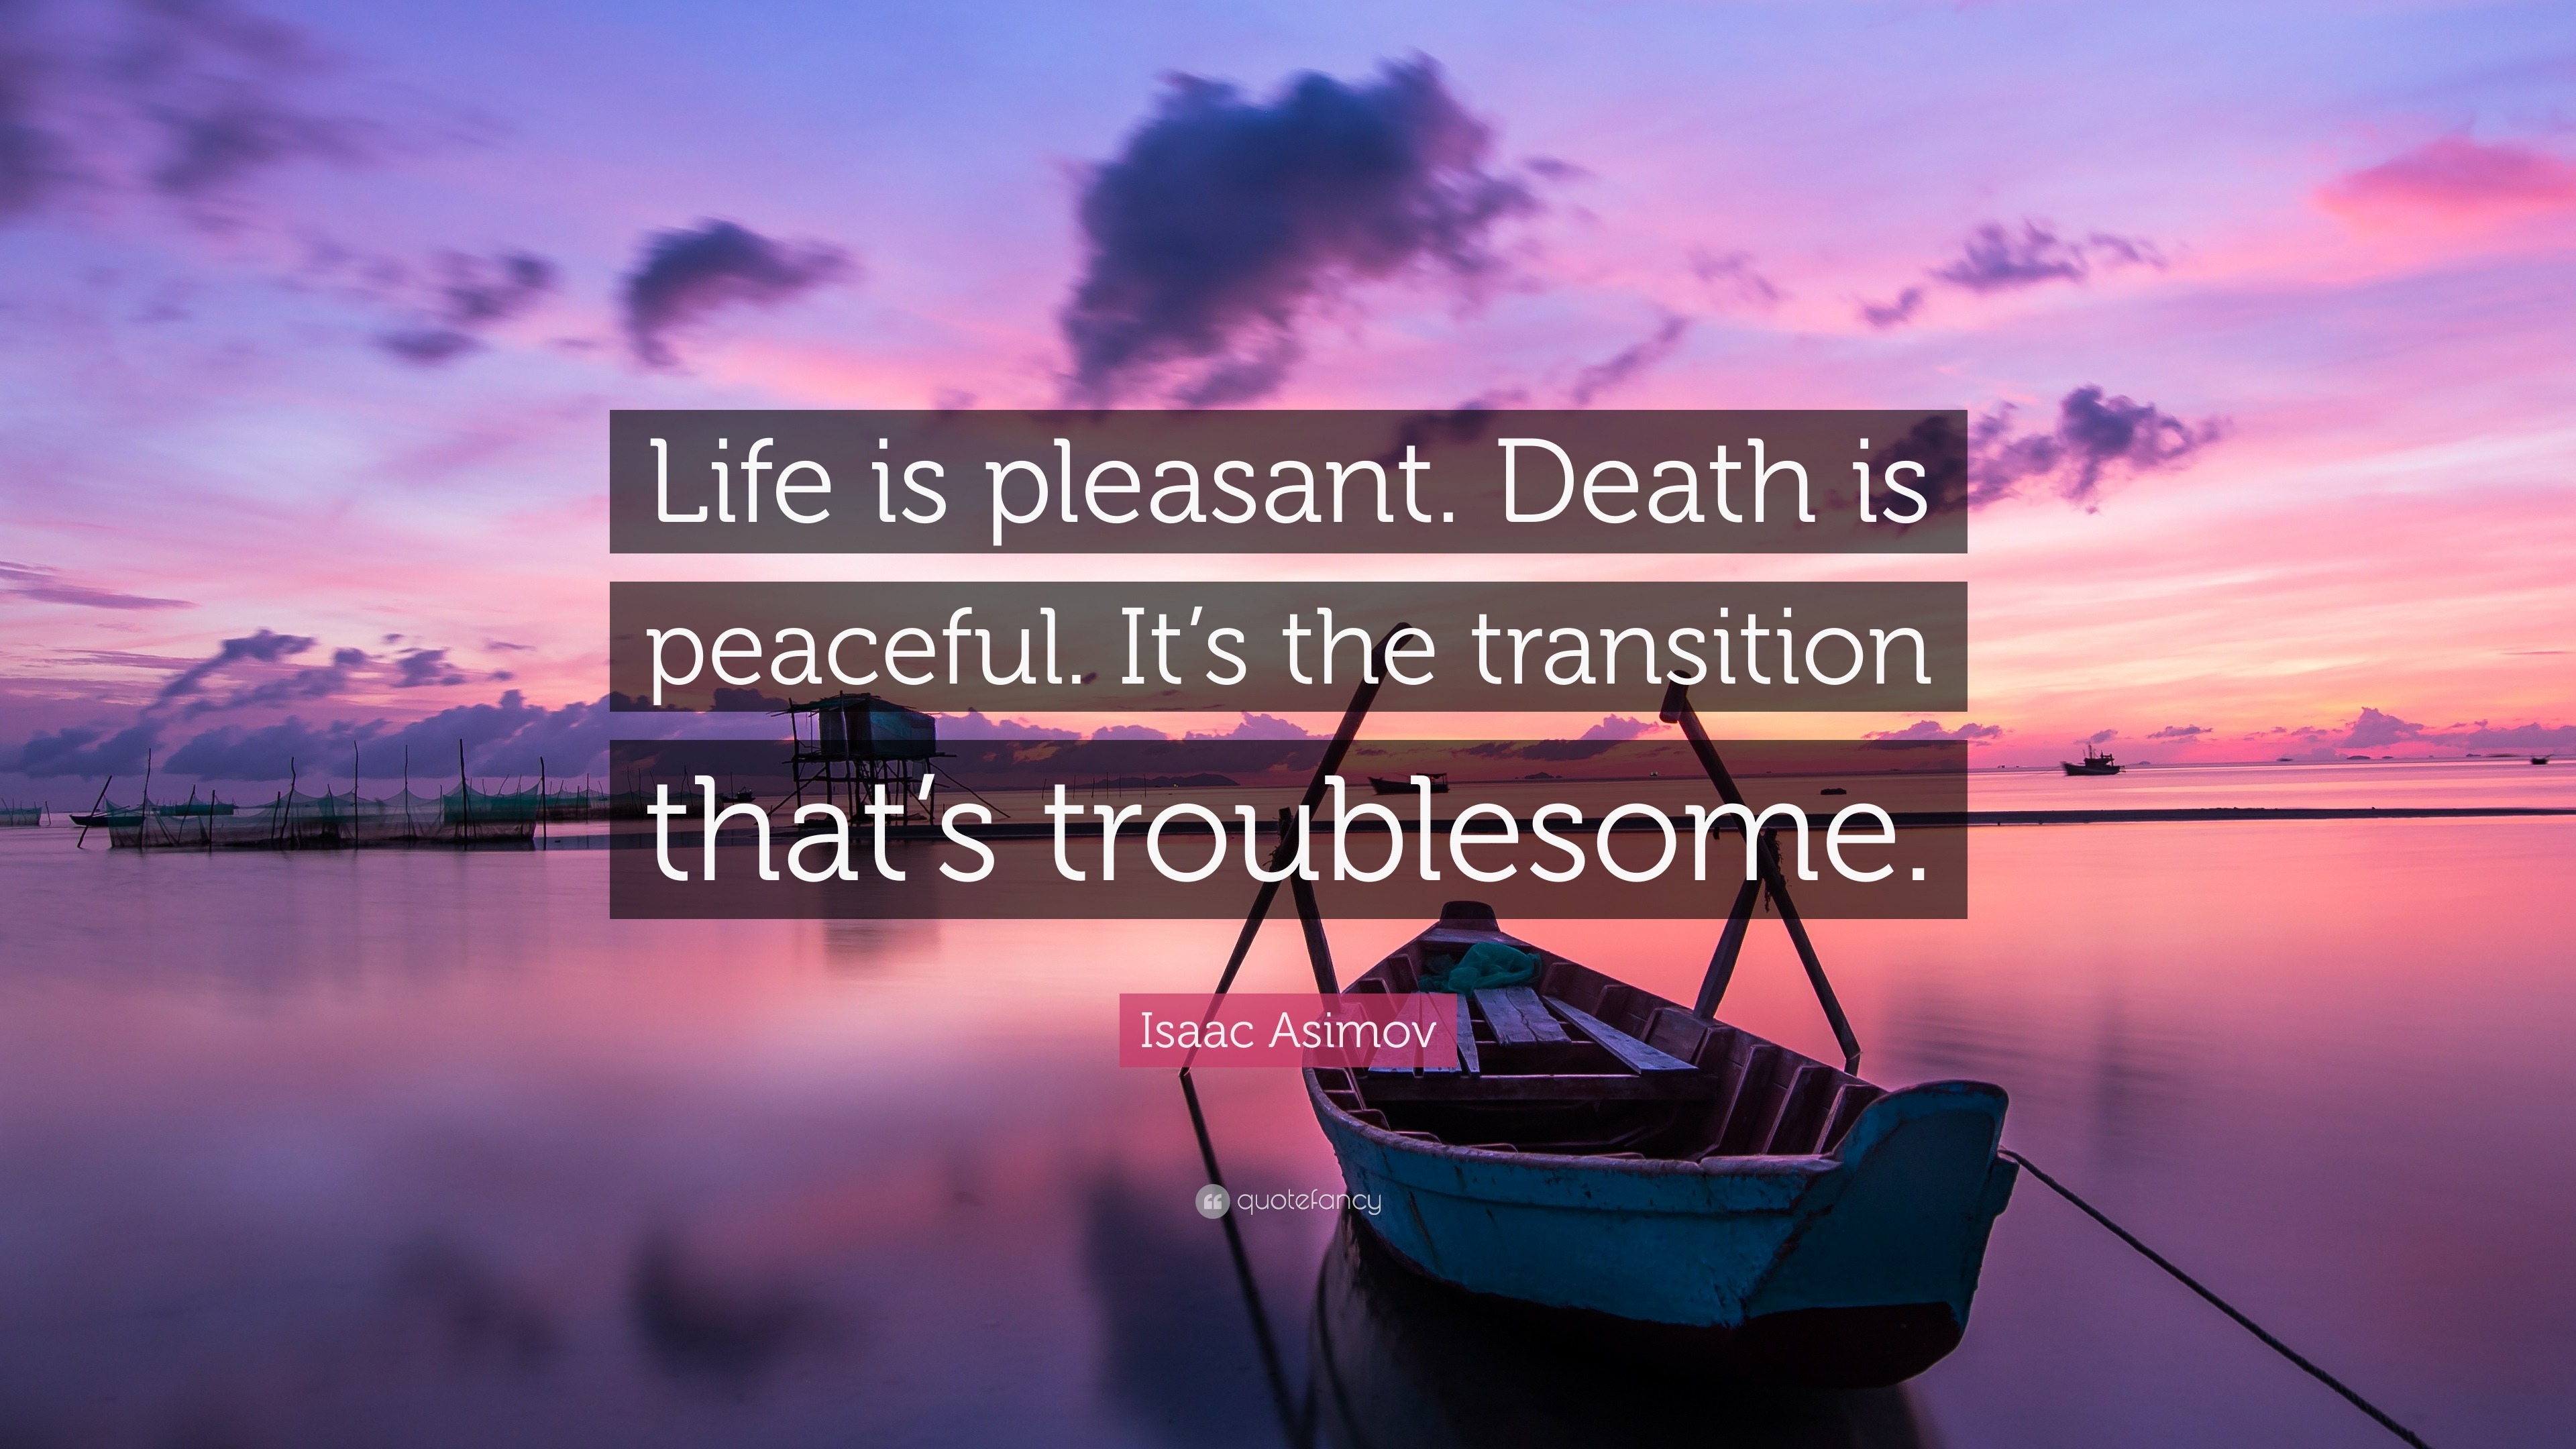 Isaac Asimov Quote: “Life is pleasant. Death is peaceful. It’s the ...